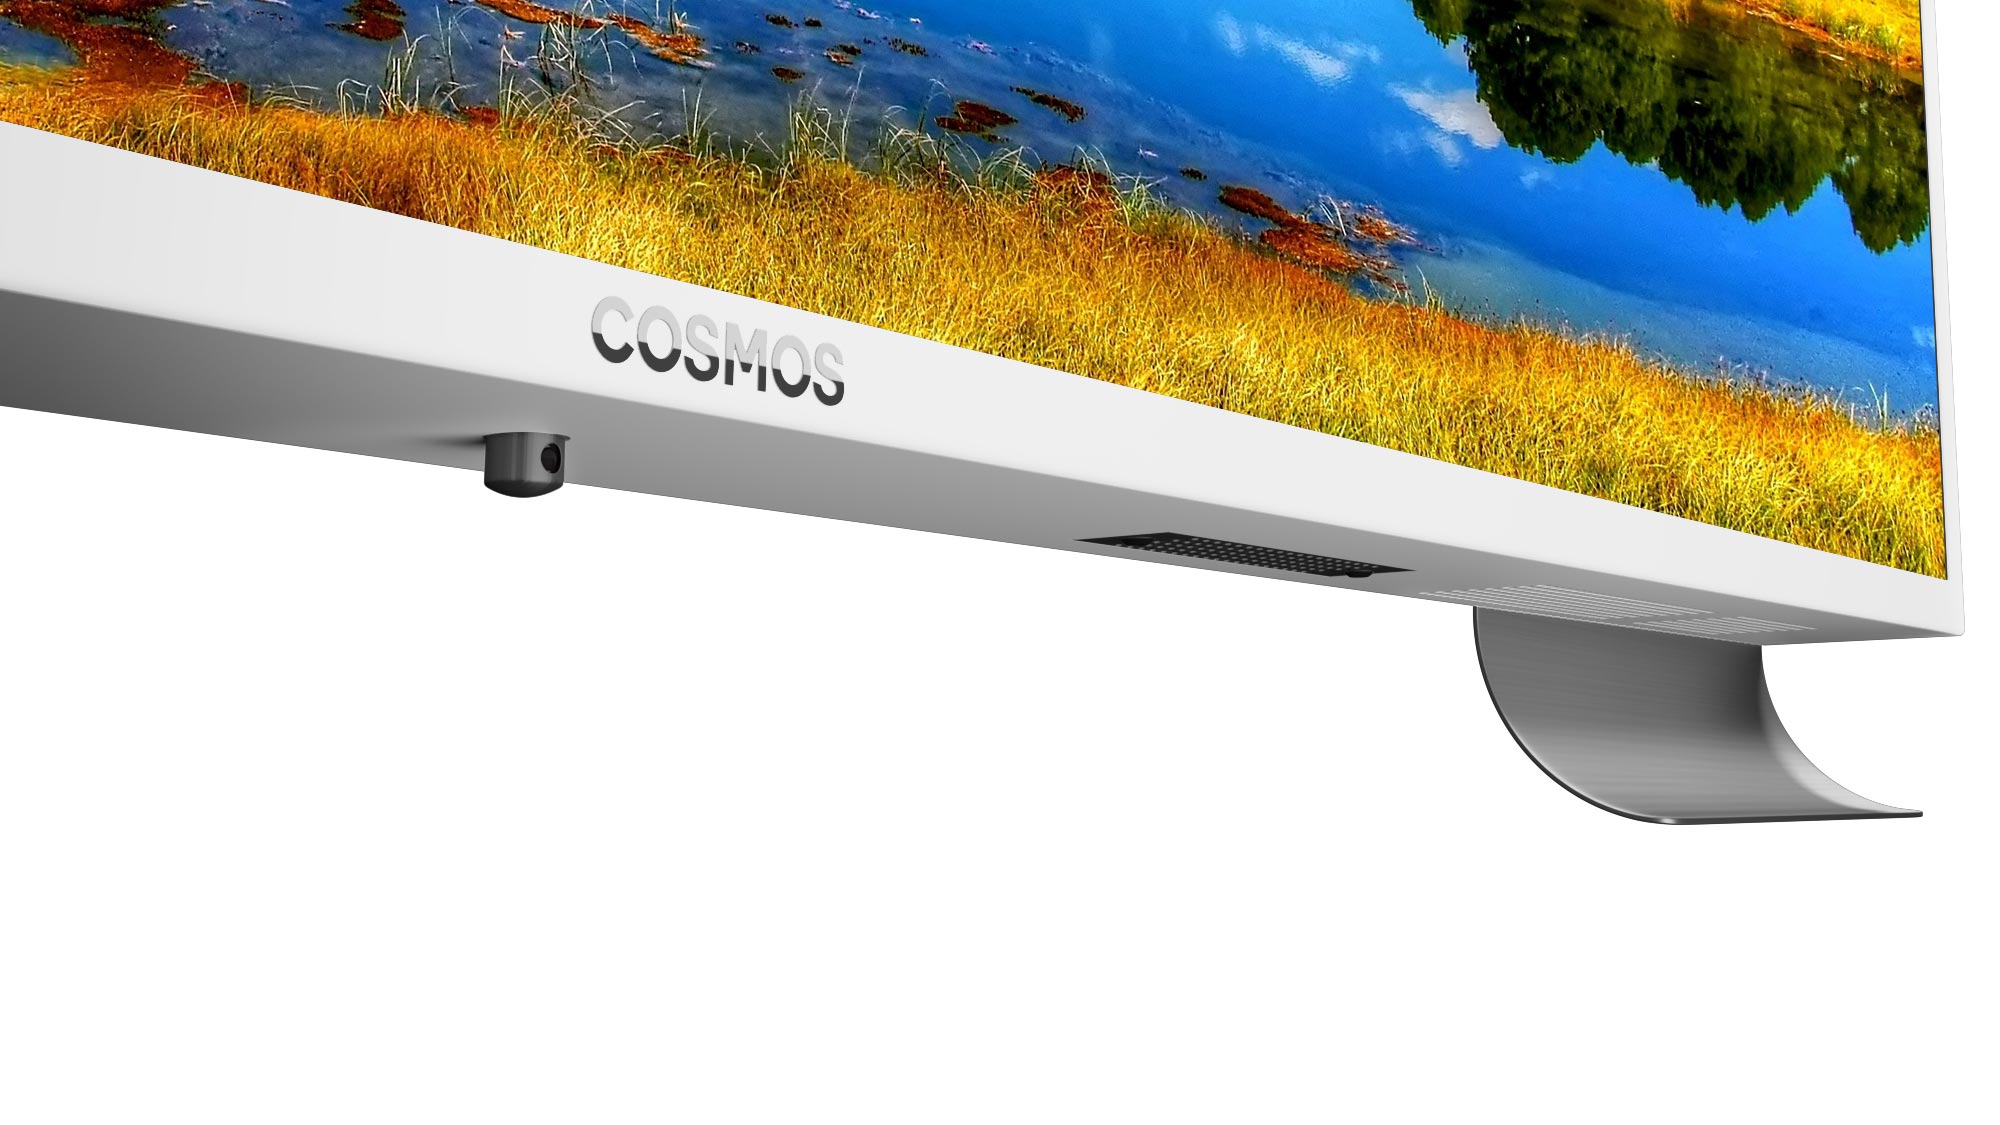 Cosmos TV with a white matte finish, exhibiting a clean, modern design and high-end technology.